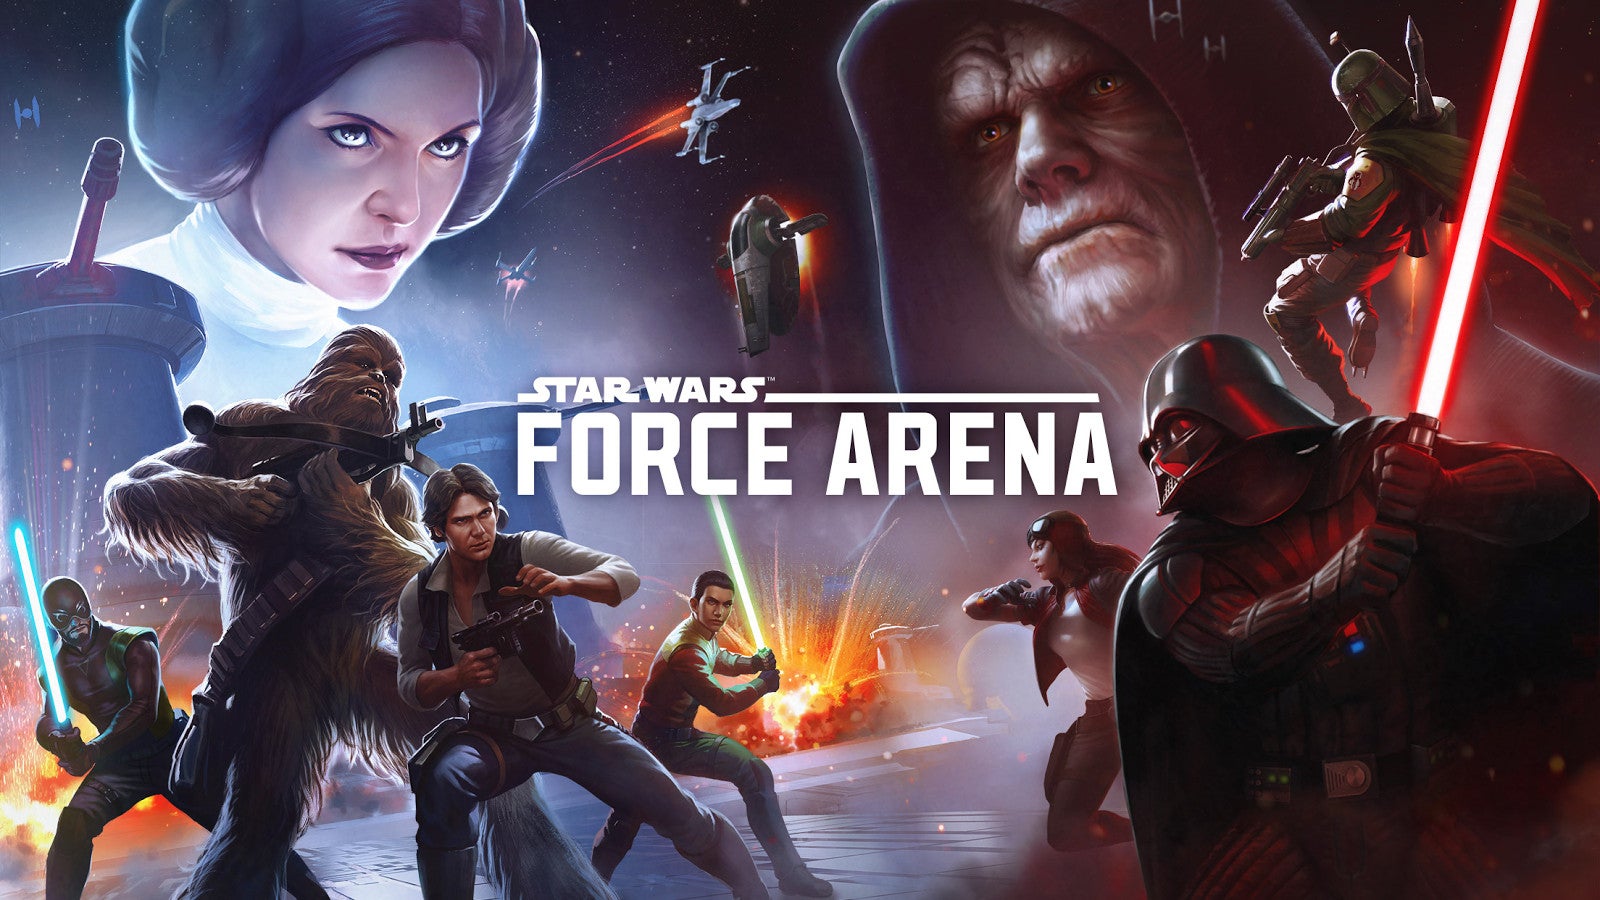 Star Wars: Force Arena gets Replay feature and four new characters from the Rogue One movie